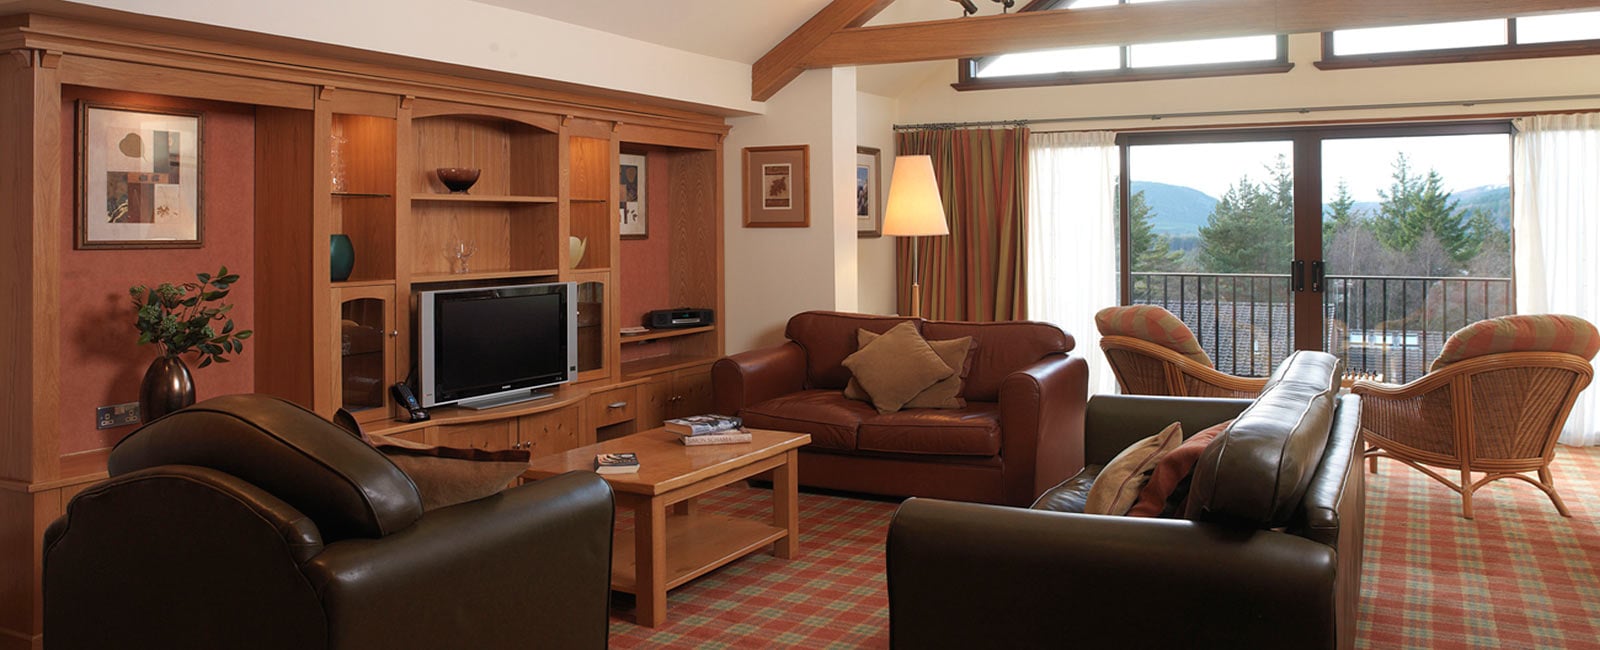 Living Area at Hilton Grand Vacations Club at Craigendarroch Lodges in Royal Deeside, Scotland